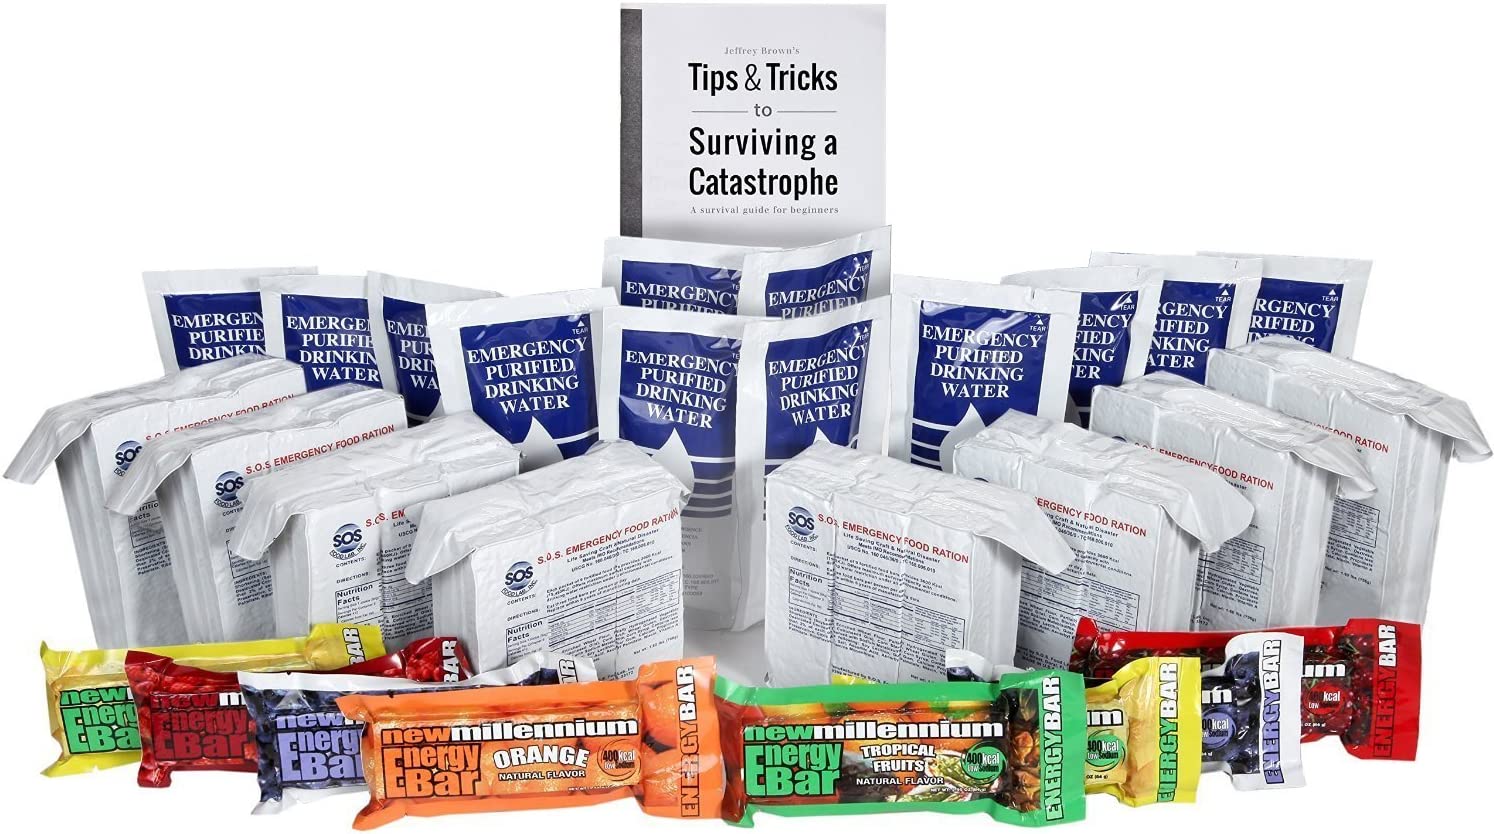 S.O.S. Rations Survival Emergency 3600 Calorie Food Bar + Pouch Emergency Purified Drinking Water + Assorted Millenium Energy bars w/ Tips Guide by Jeff Brown